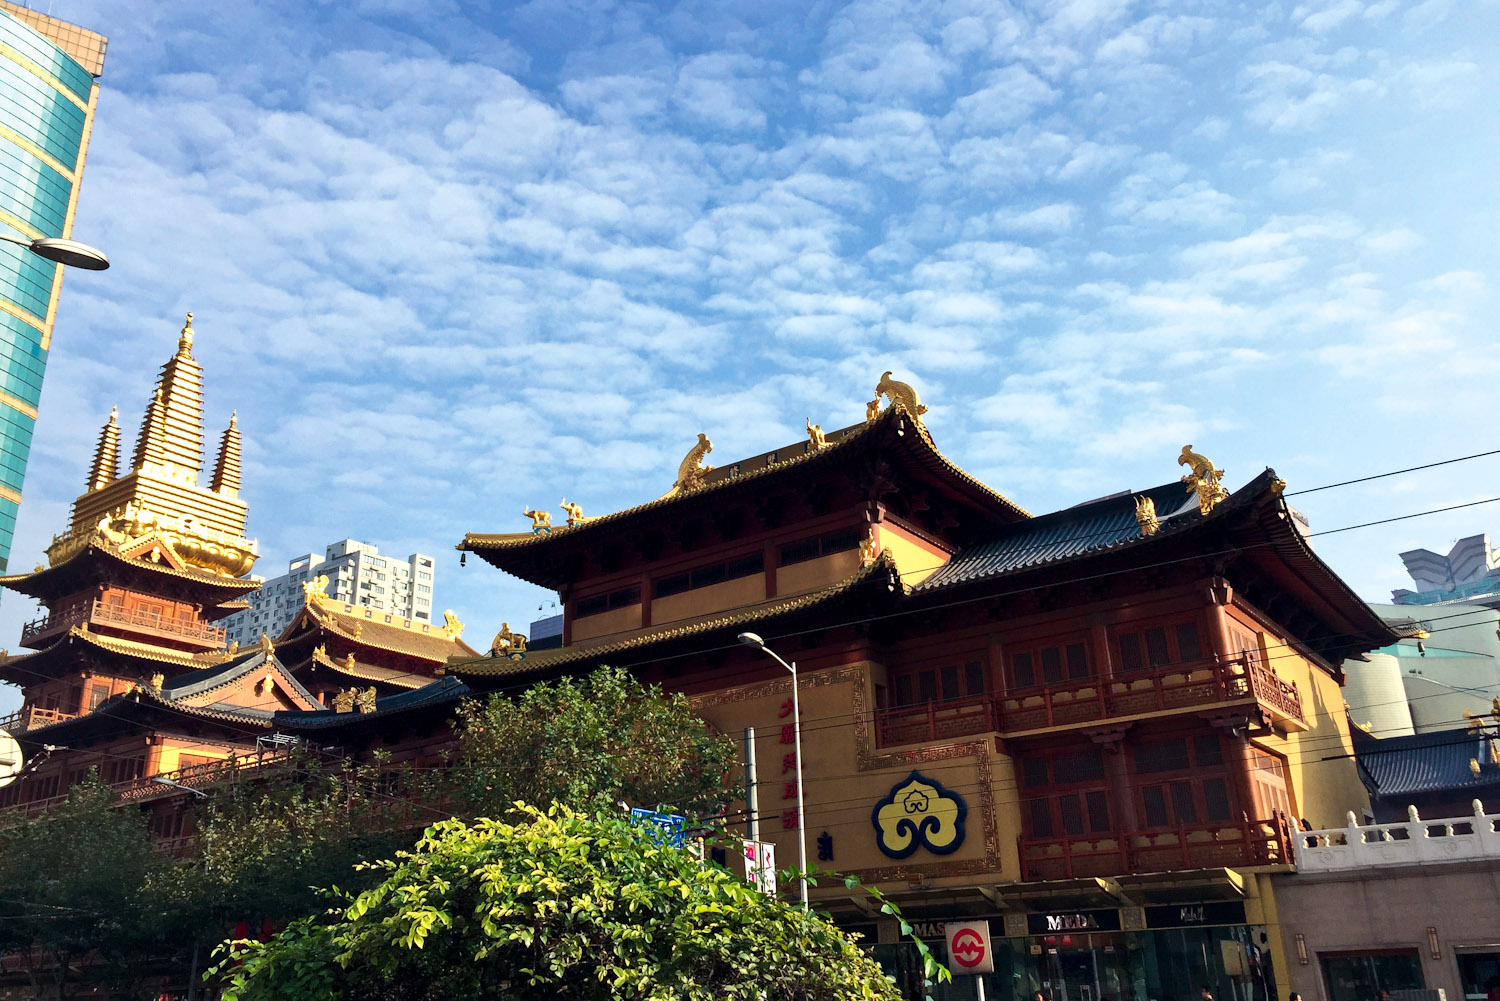 Jing'an Temple is a Buddhist temple on Shanghai's West Nanjing Road.